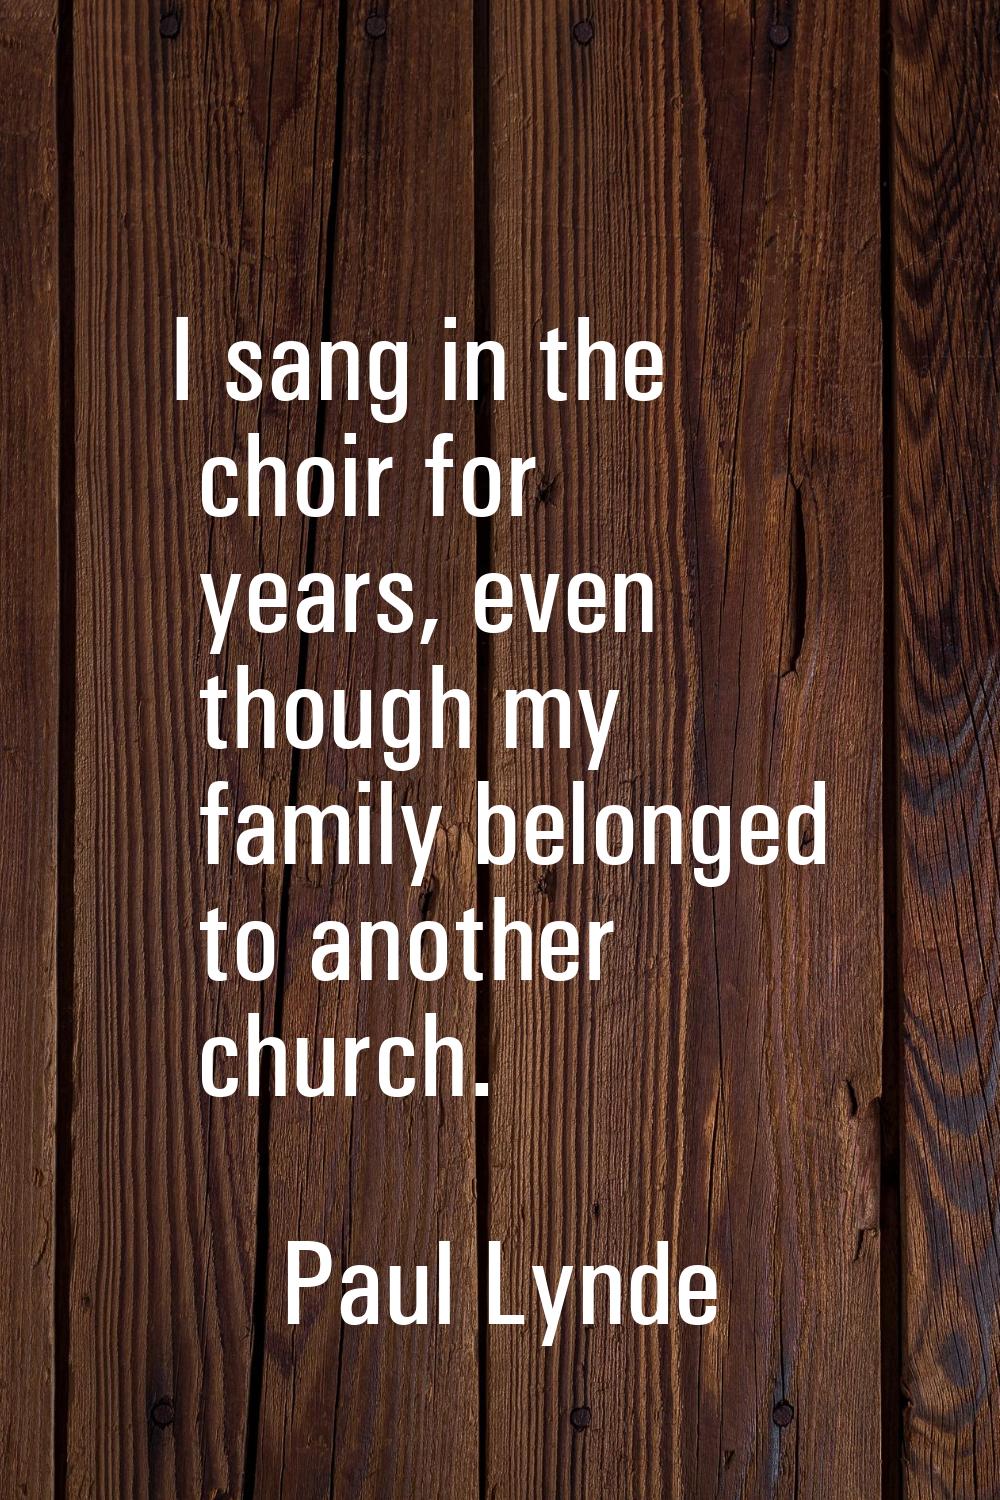 I sang in the choir for years, even though my family belonged to another church.